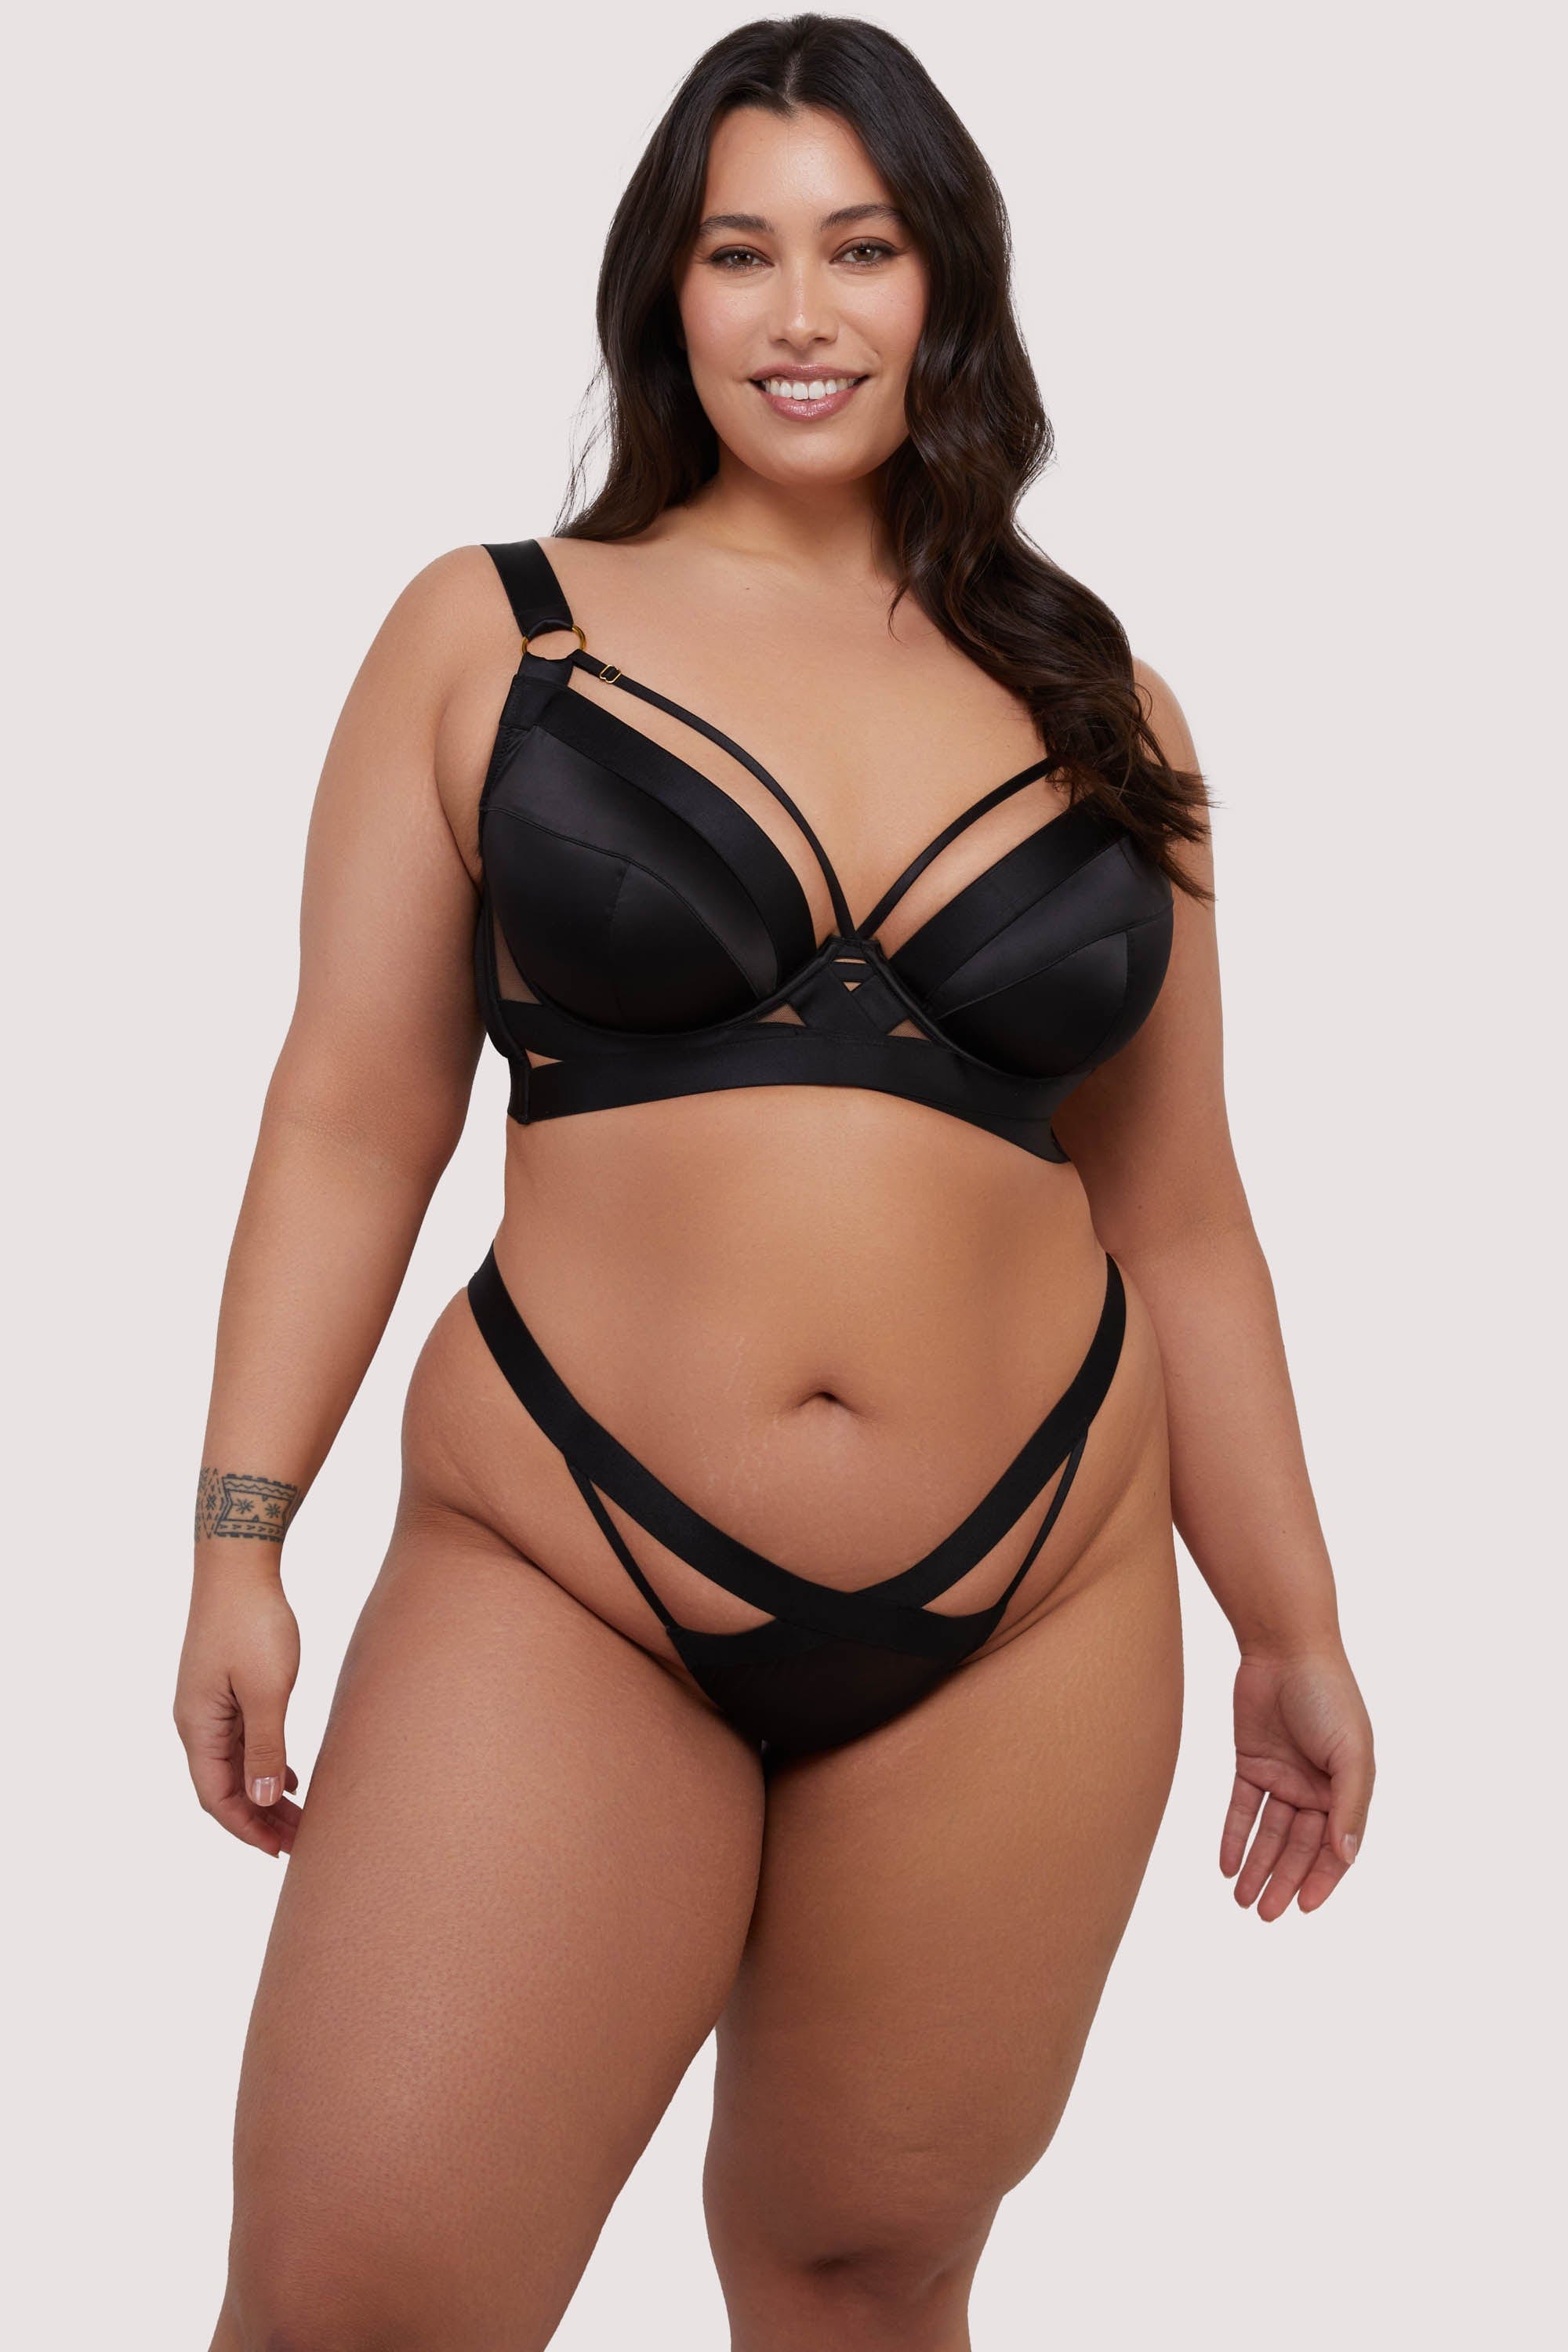 model wears black lingerie set with elastic and mesh brief